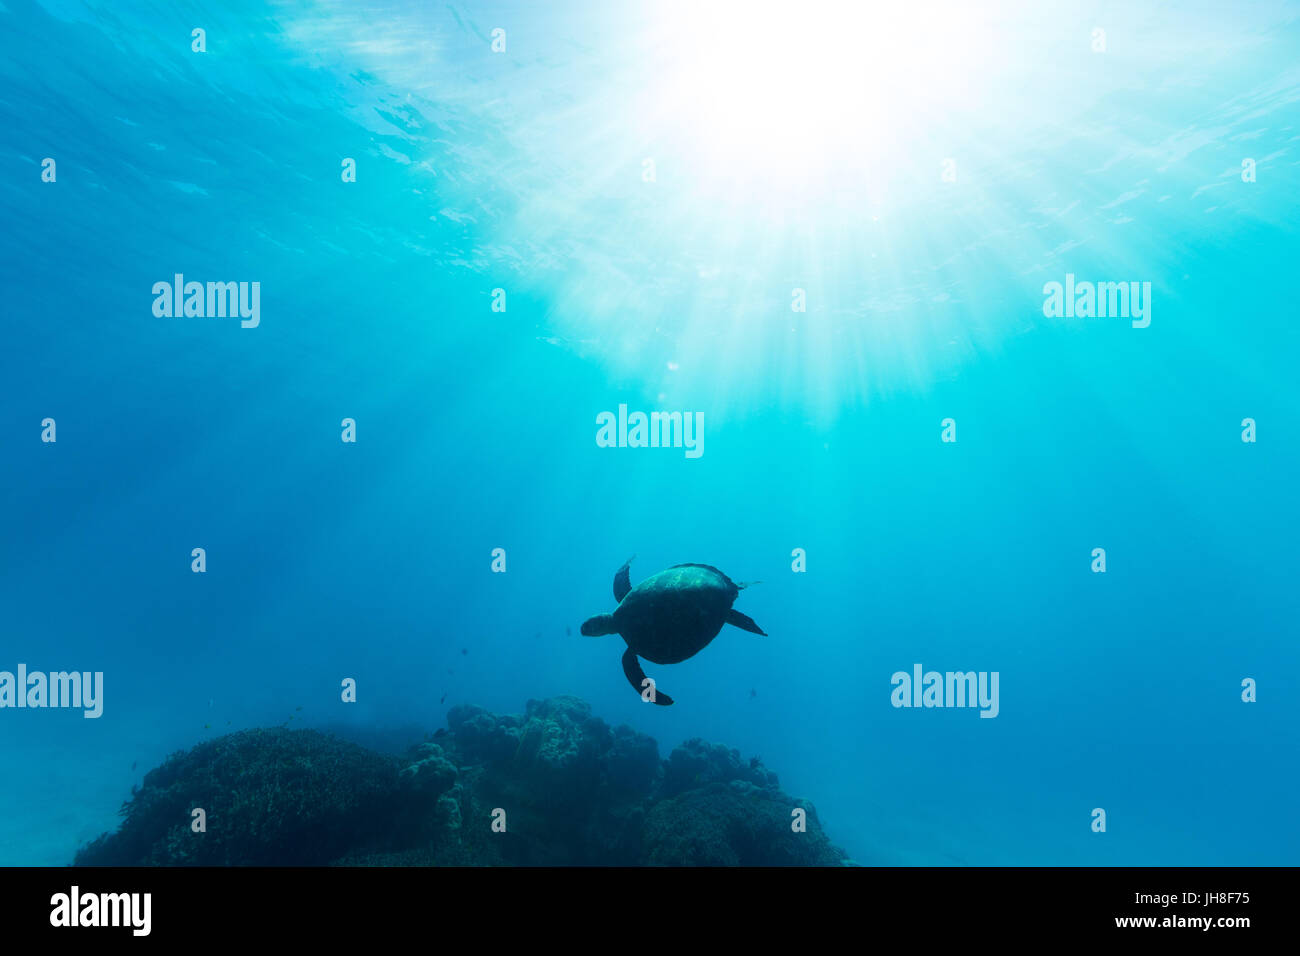 A sea turtle is illuminated by beautiful ethereal sun light as it swims through pristine blue water on the Great Barrier Reef. Stock Photo